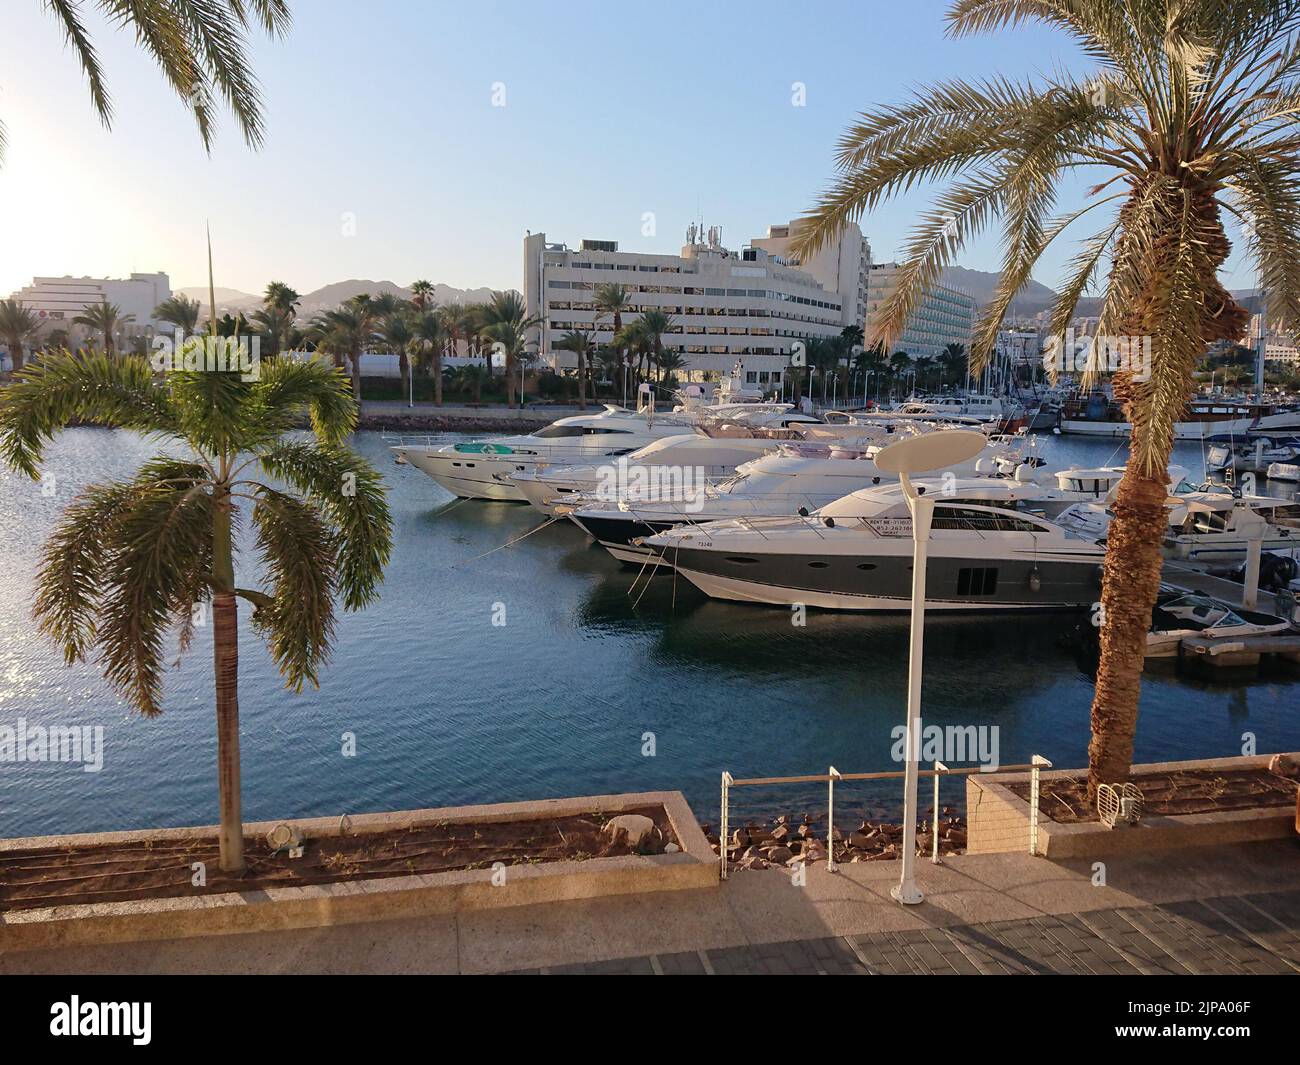 Boats parked in the marina of the city of Eilat, Israel Stock Photo